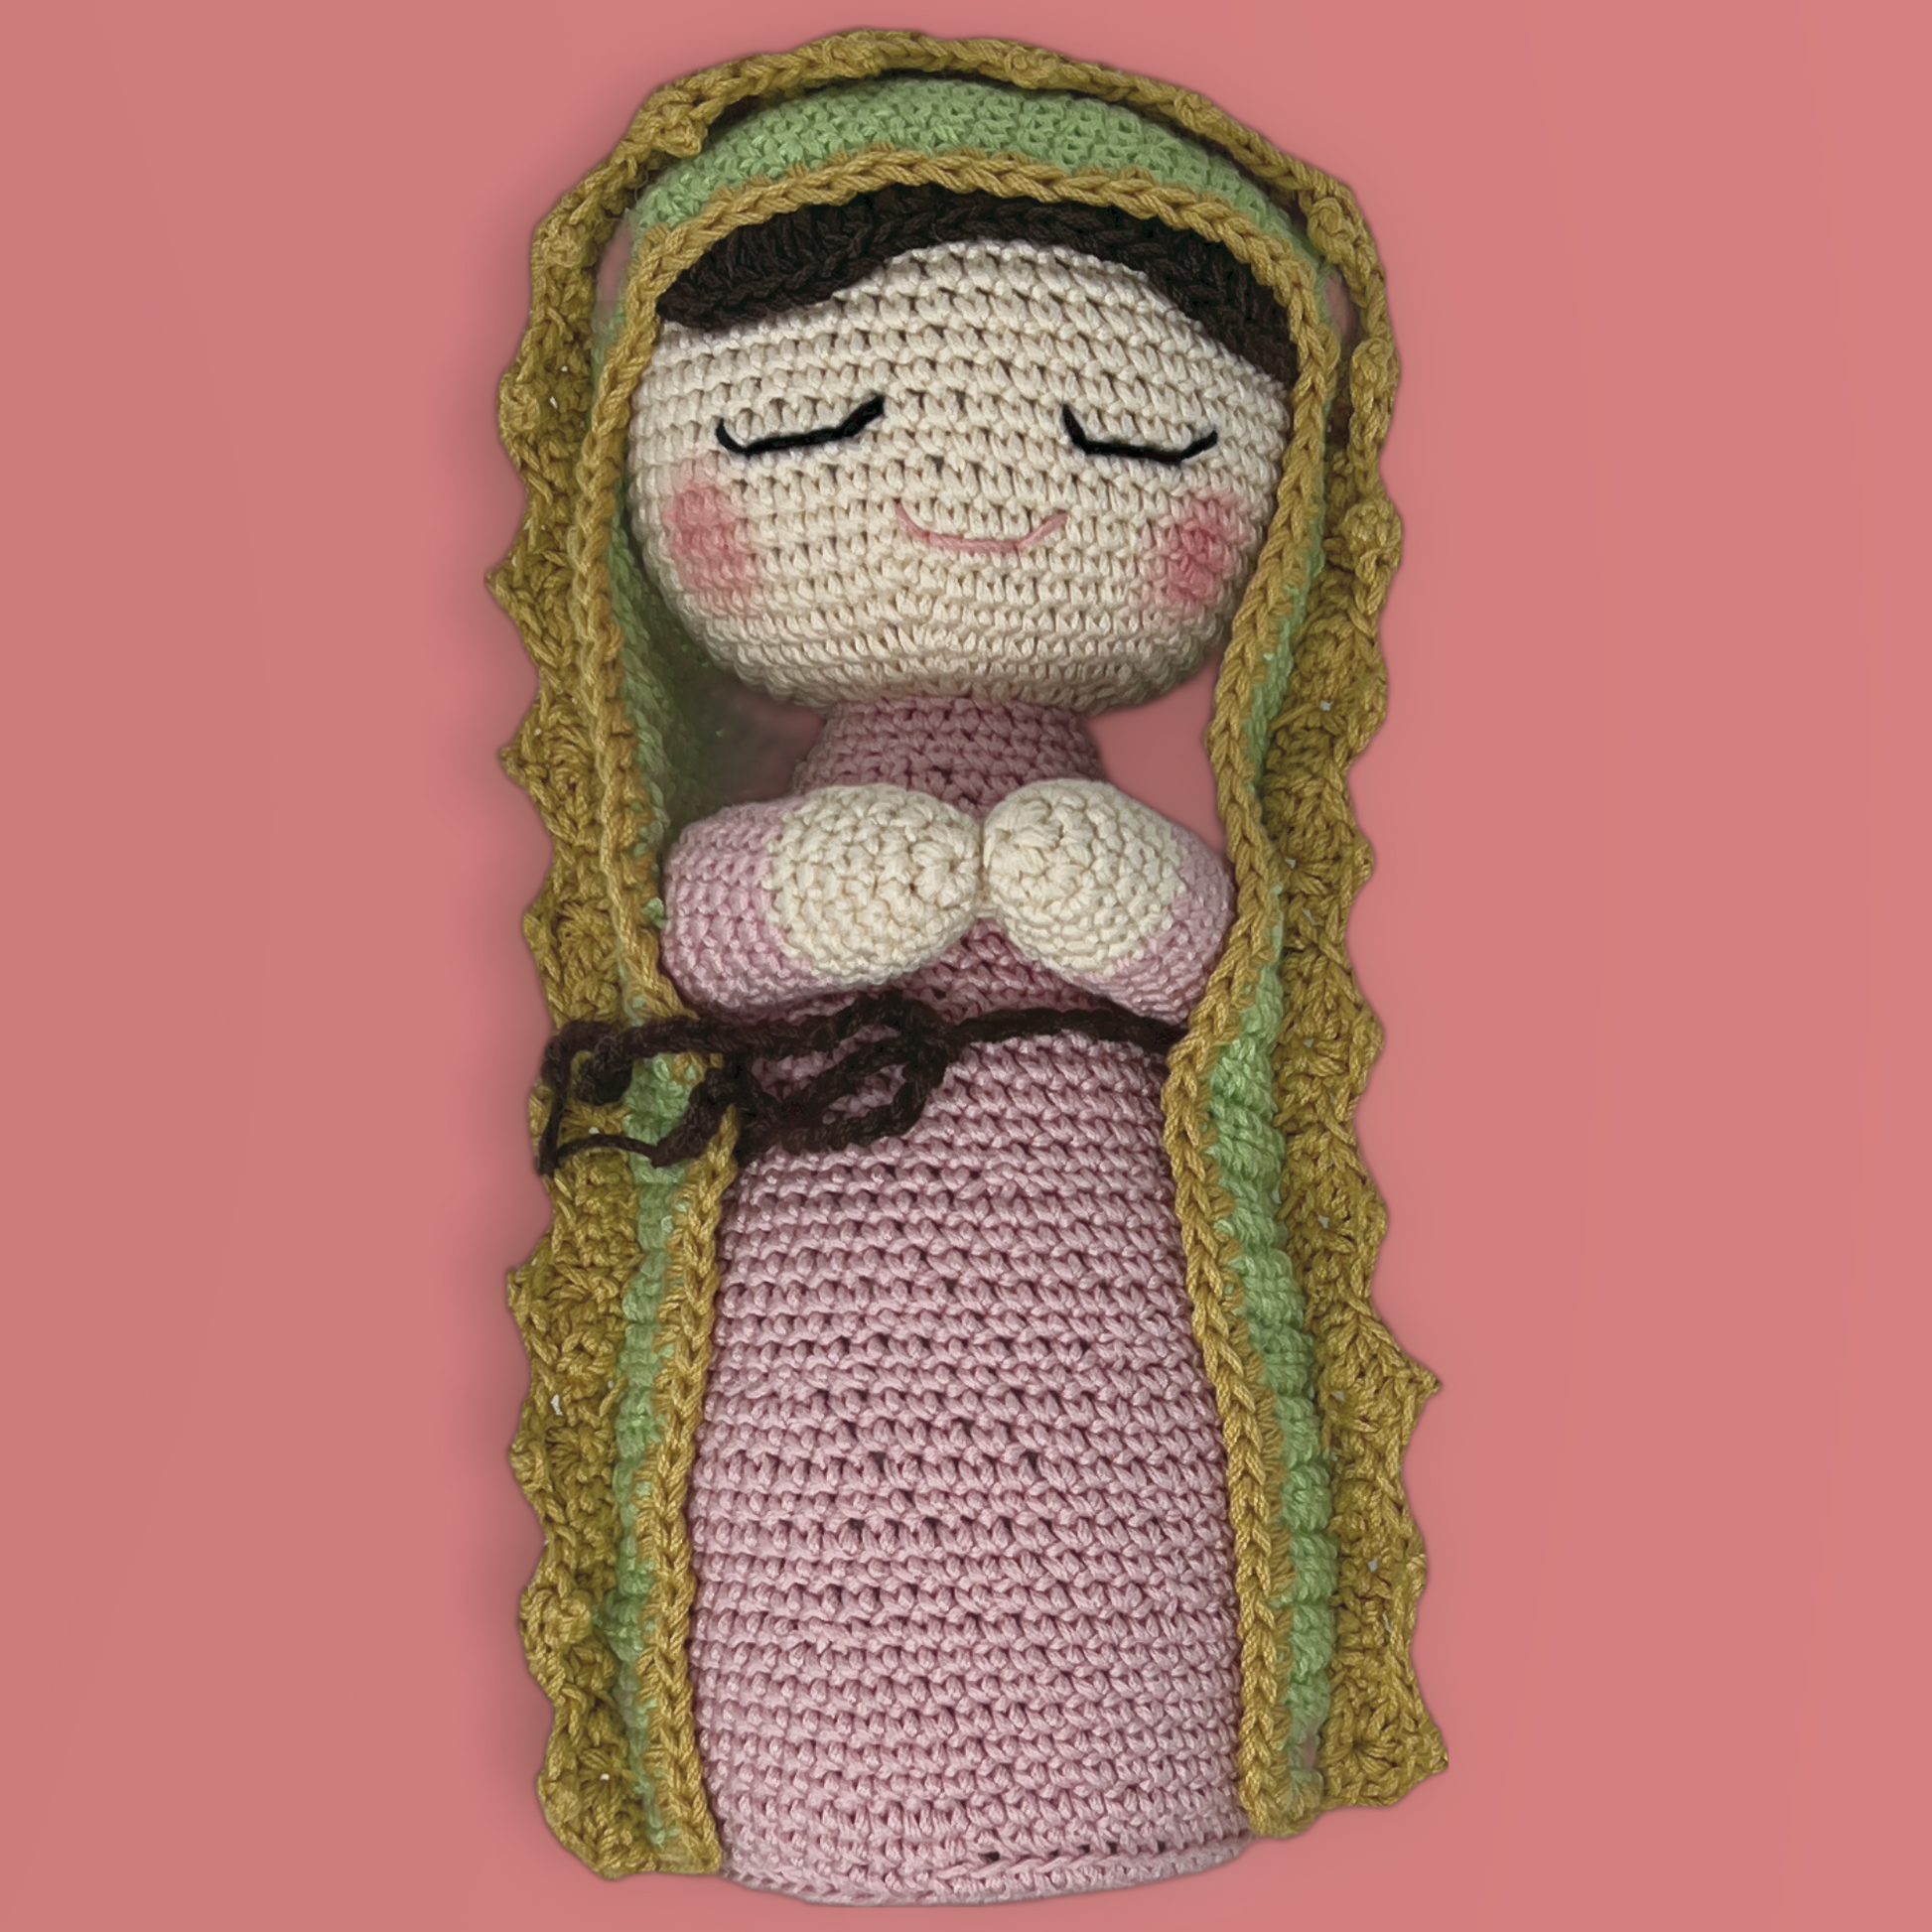 Handmade crochet dolls and is made with pink dress, and green manta crafted by hand